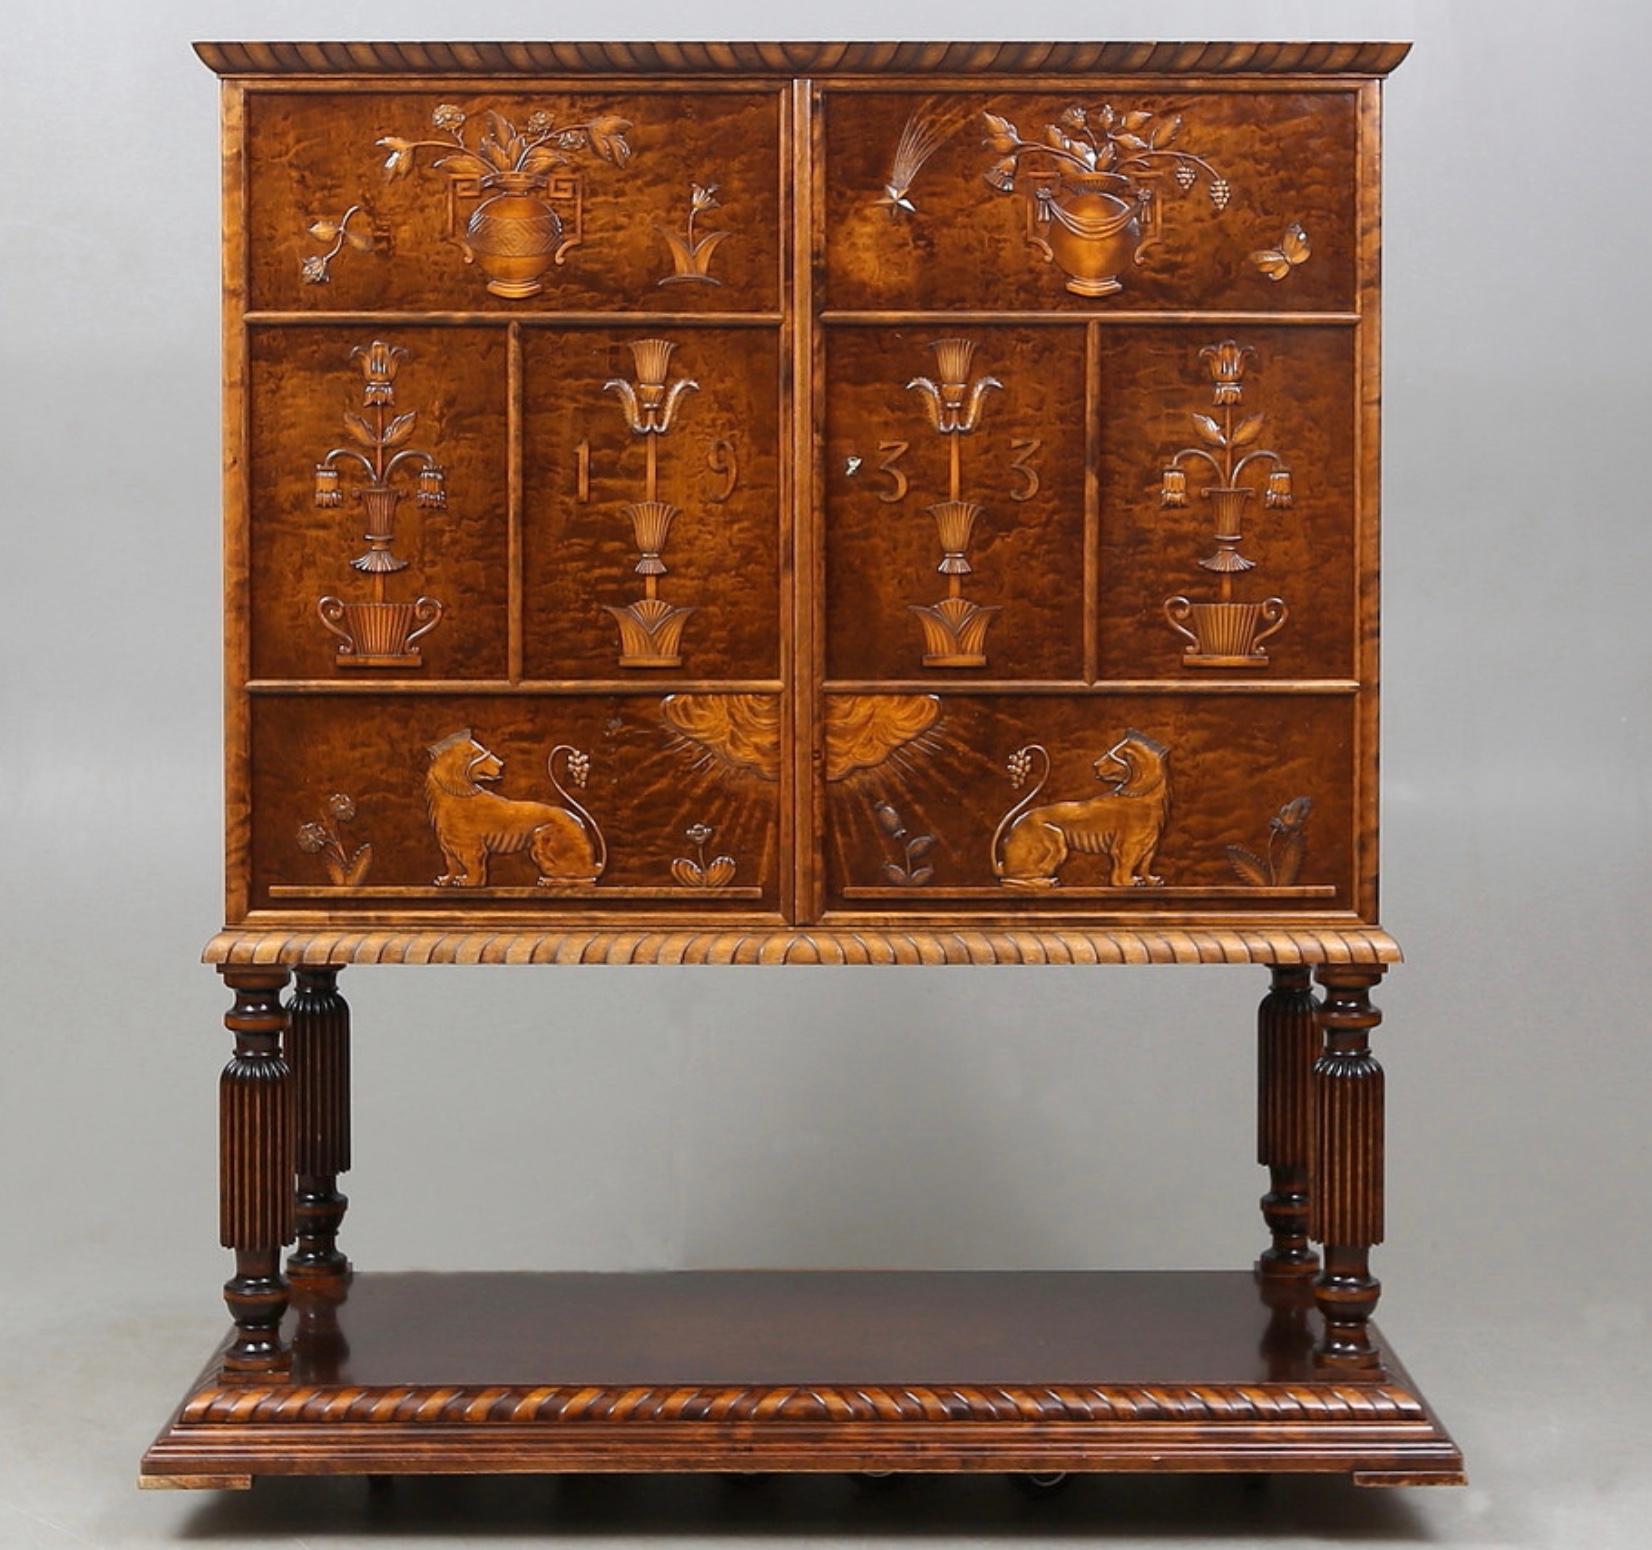 Very rare if not unique cabinet designed by Axel Einar Hjorth, model 